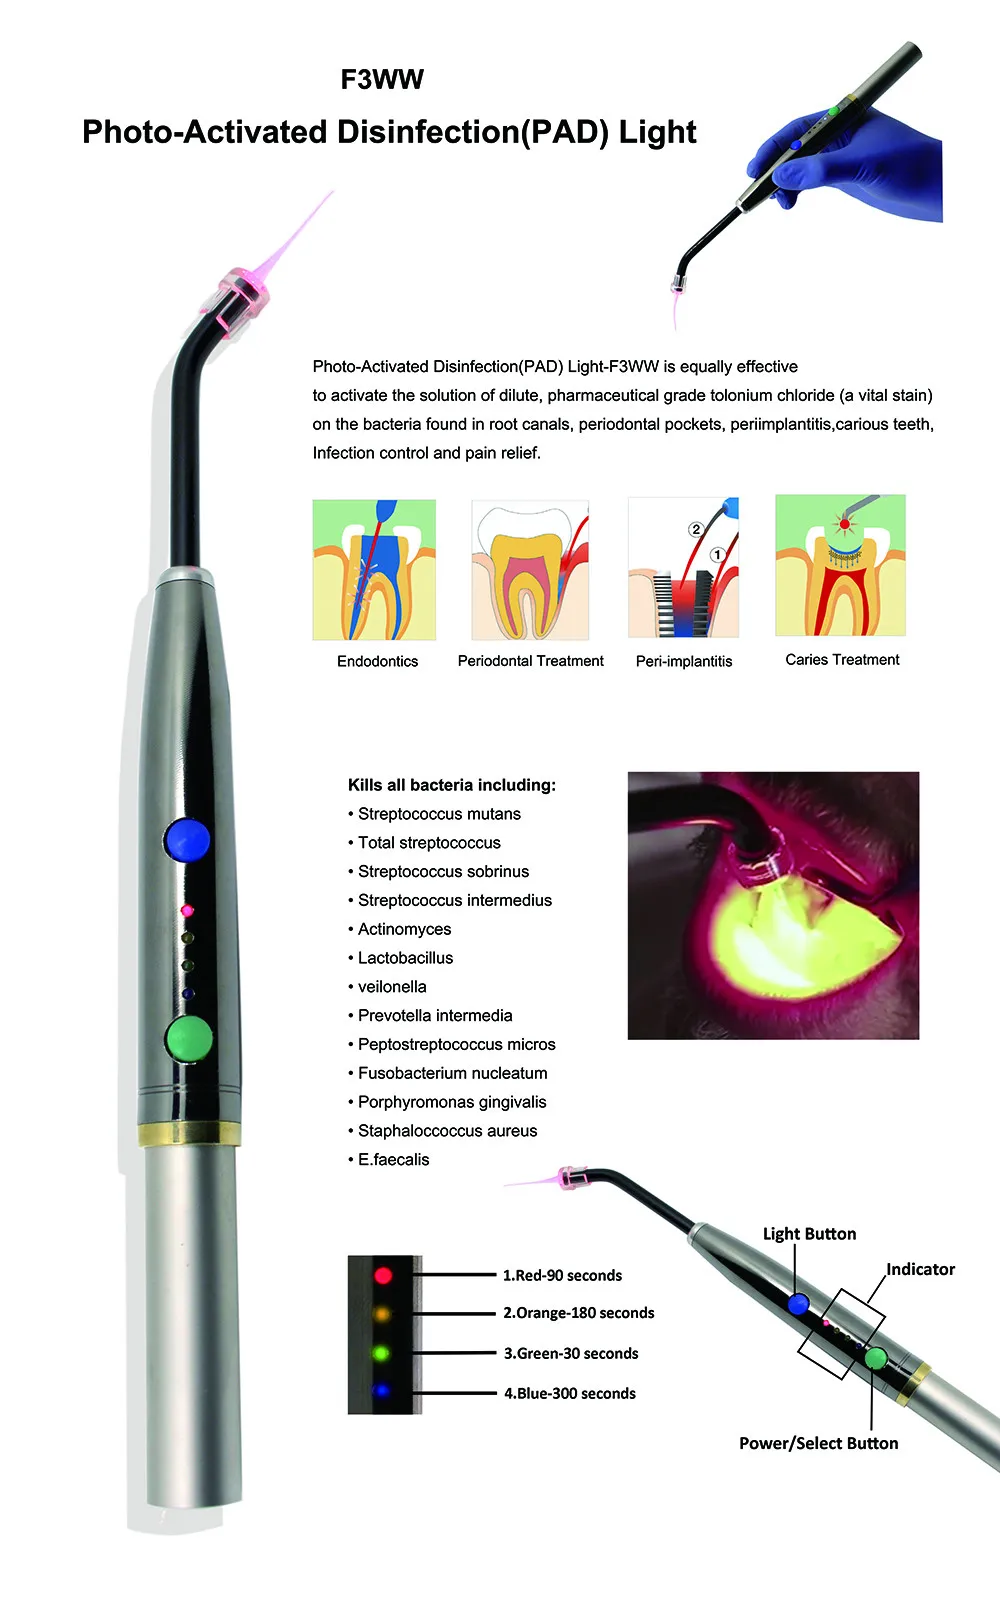 Photo-Activated Disinfection Medical Laser Equipment/F3WW PAD Light dental oral heal laser treatment